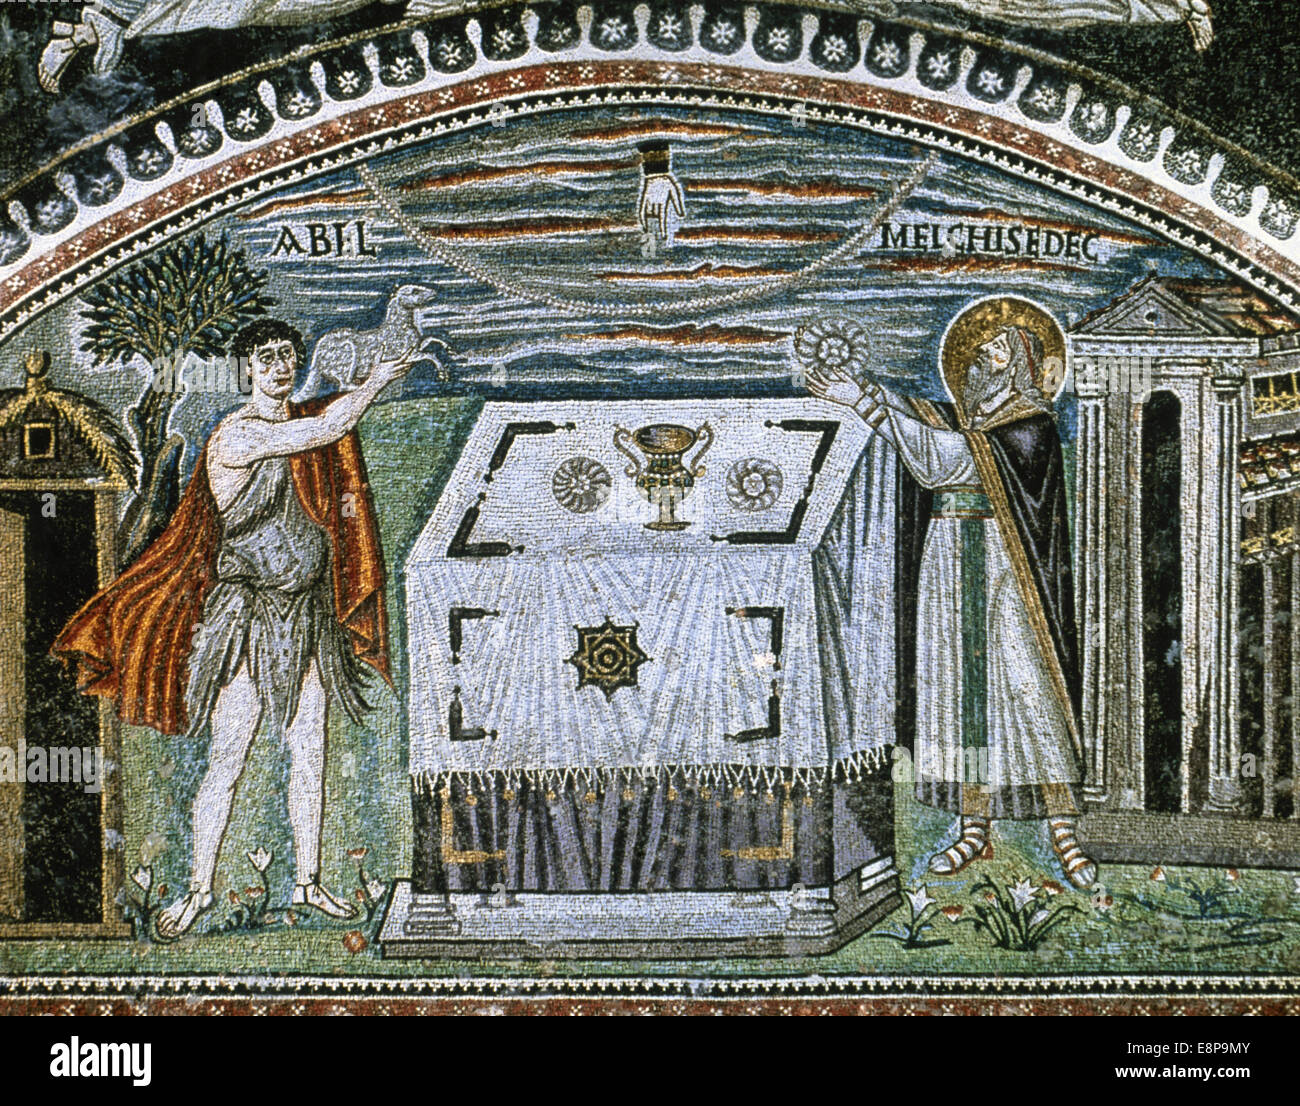 Abraham's life. Abel and Melchizedek bringing their offerings to the altar (538-545 AD). Basilica of St. Vitale. Ravenna. Italy. Stock Photo